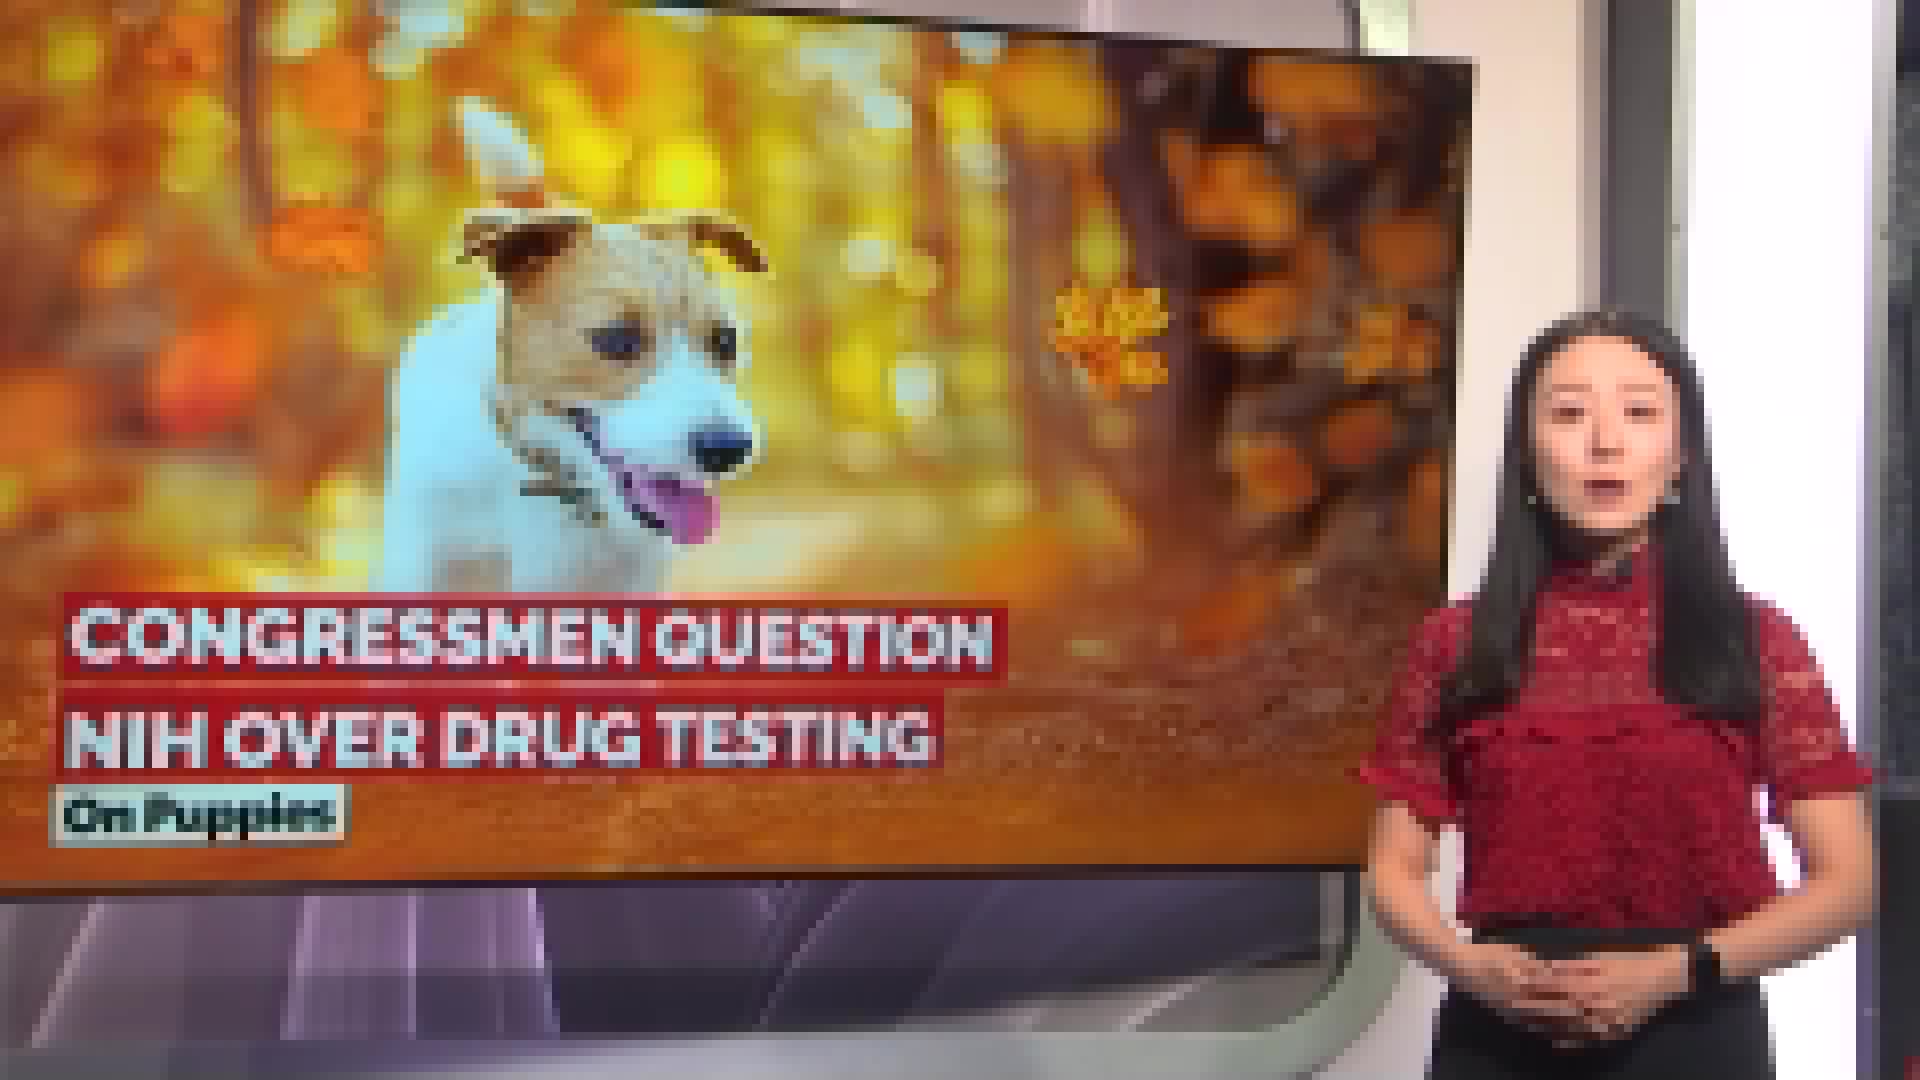 Congressmen question NIH over drug testing on puppies